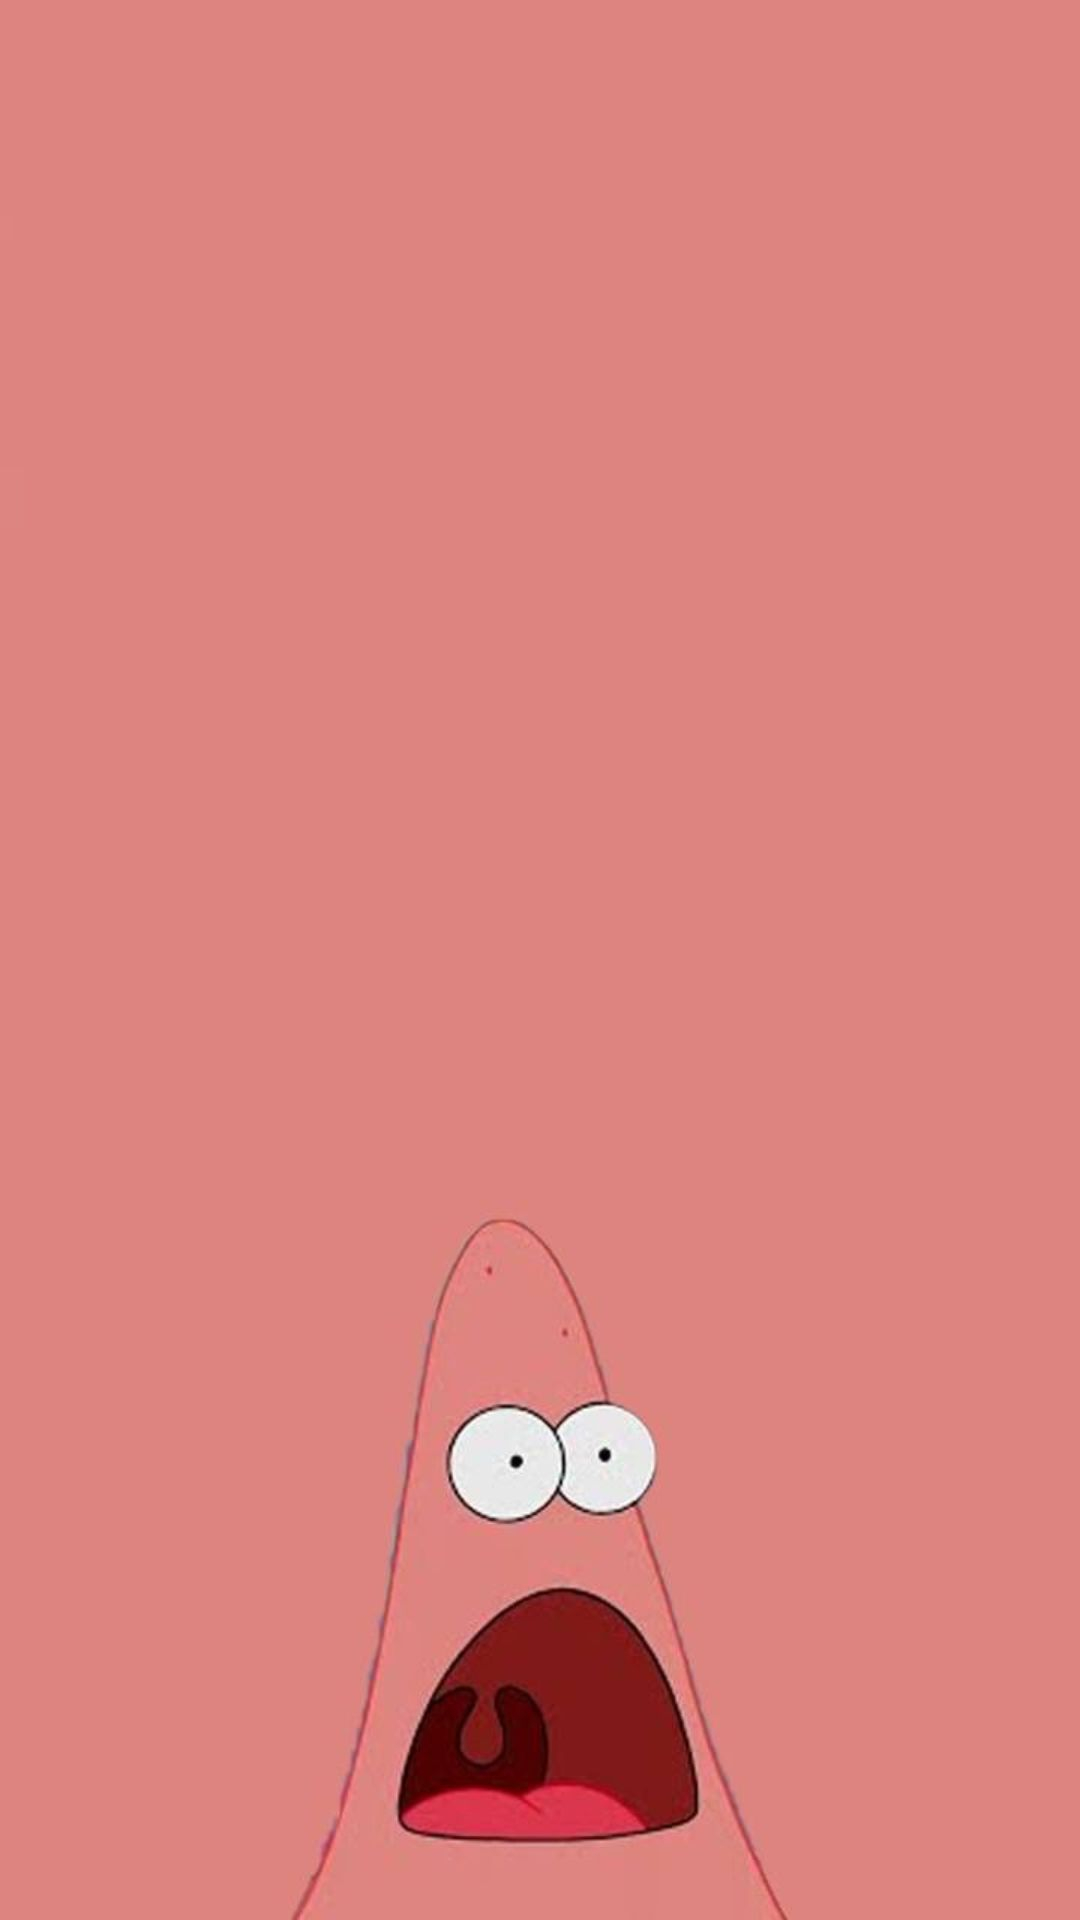 1080x1920 Cute Spongebob Wallpapers Free Delivery, 57% OFF